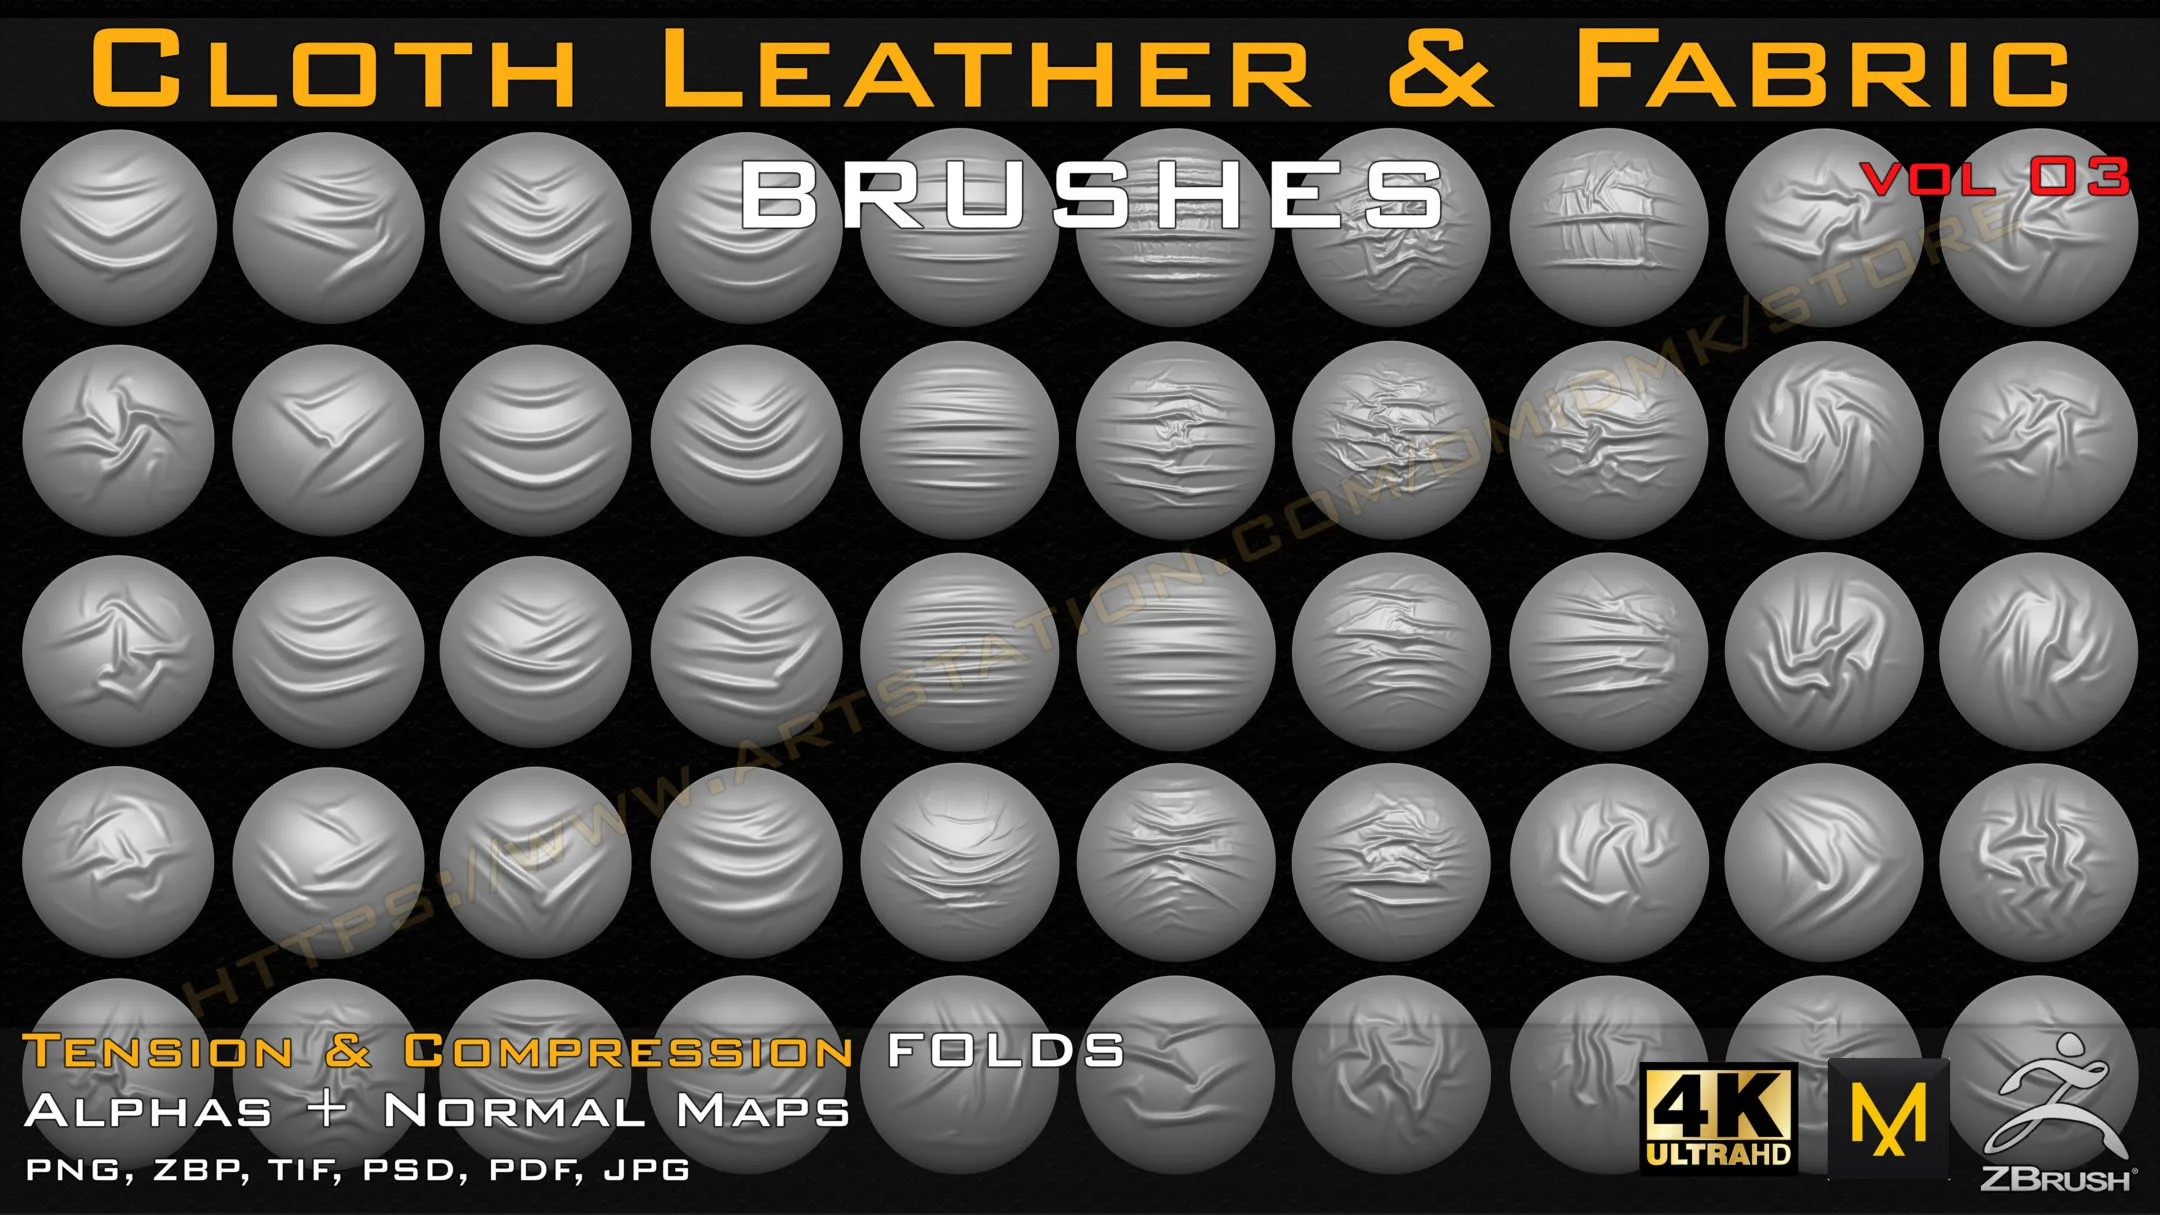 50 Cloth Leather & Fabric Brushes (4k) Tension & Compression Folds- Alpha + Normal Maps ( Vol.03 )